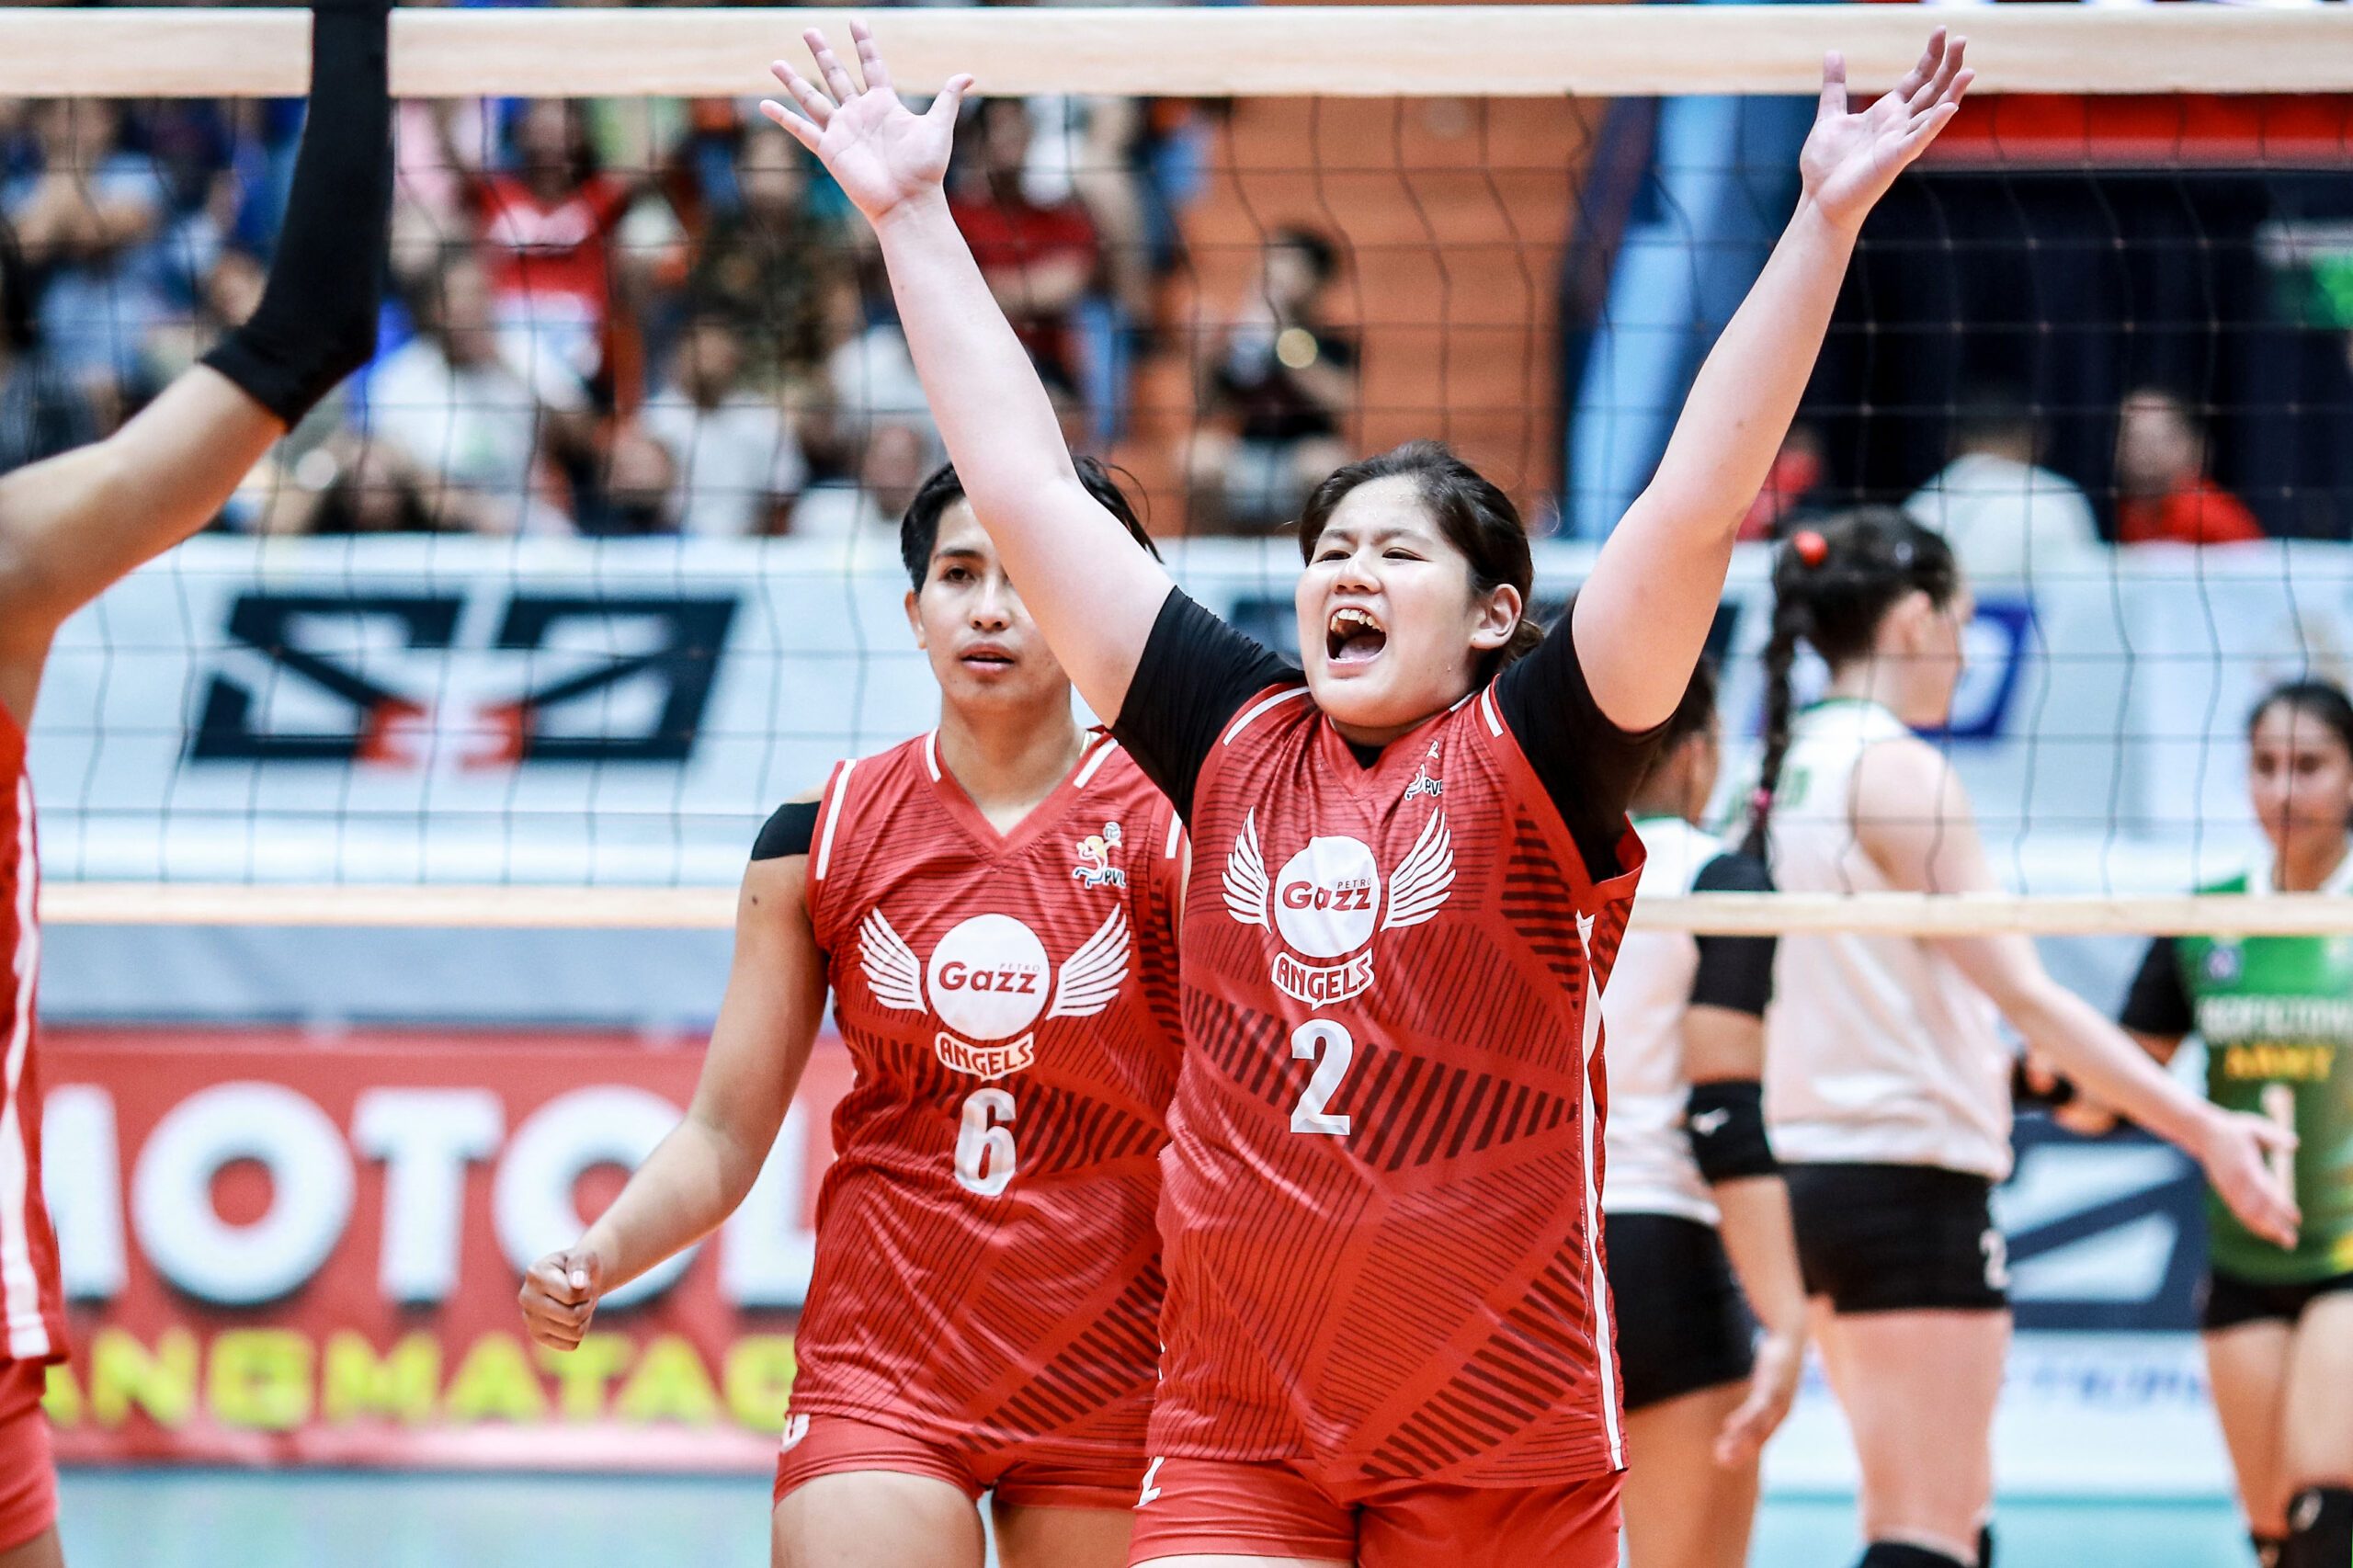 PVL: PetroGazz bounces back with sweep of Pacifictown